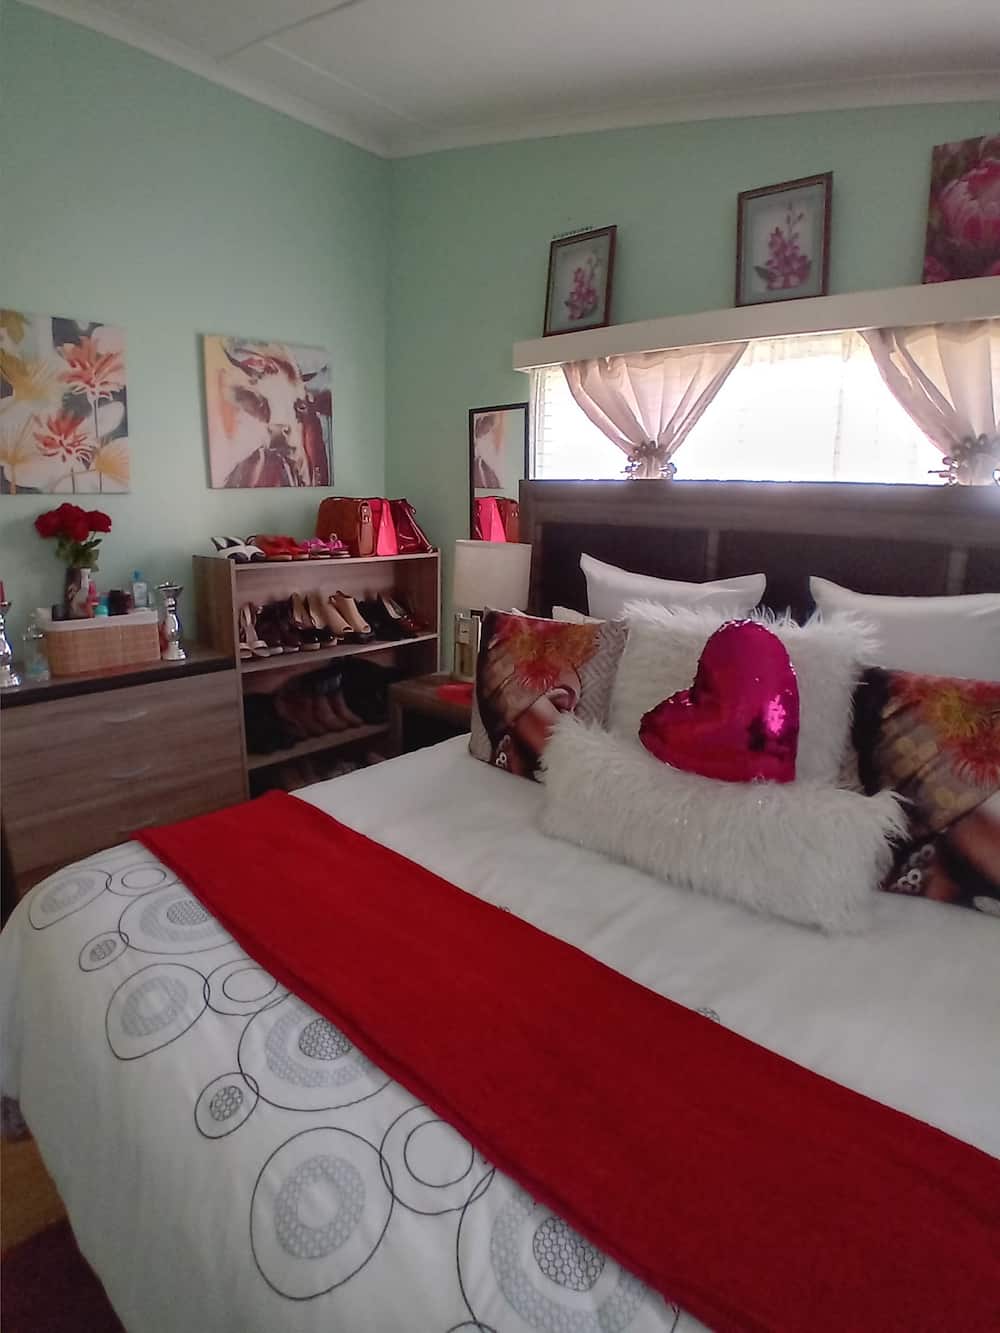 Mzansi lady's stunning decorating skills trends on social media shows off her bedroom.